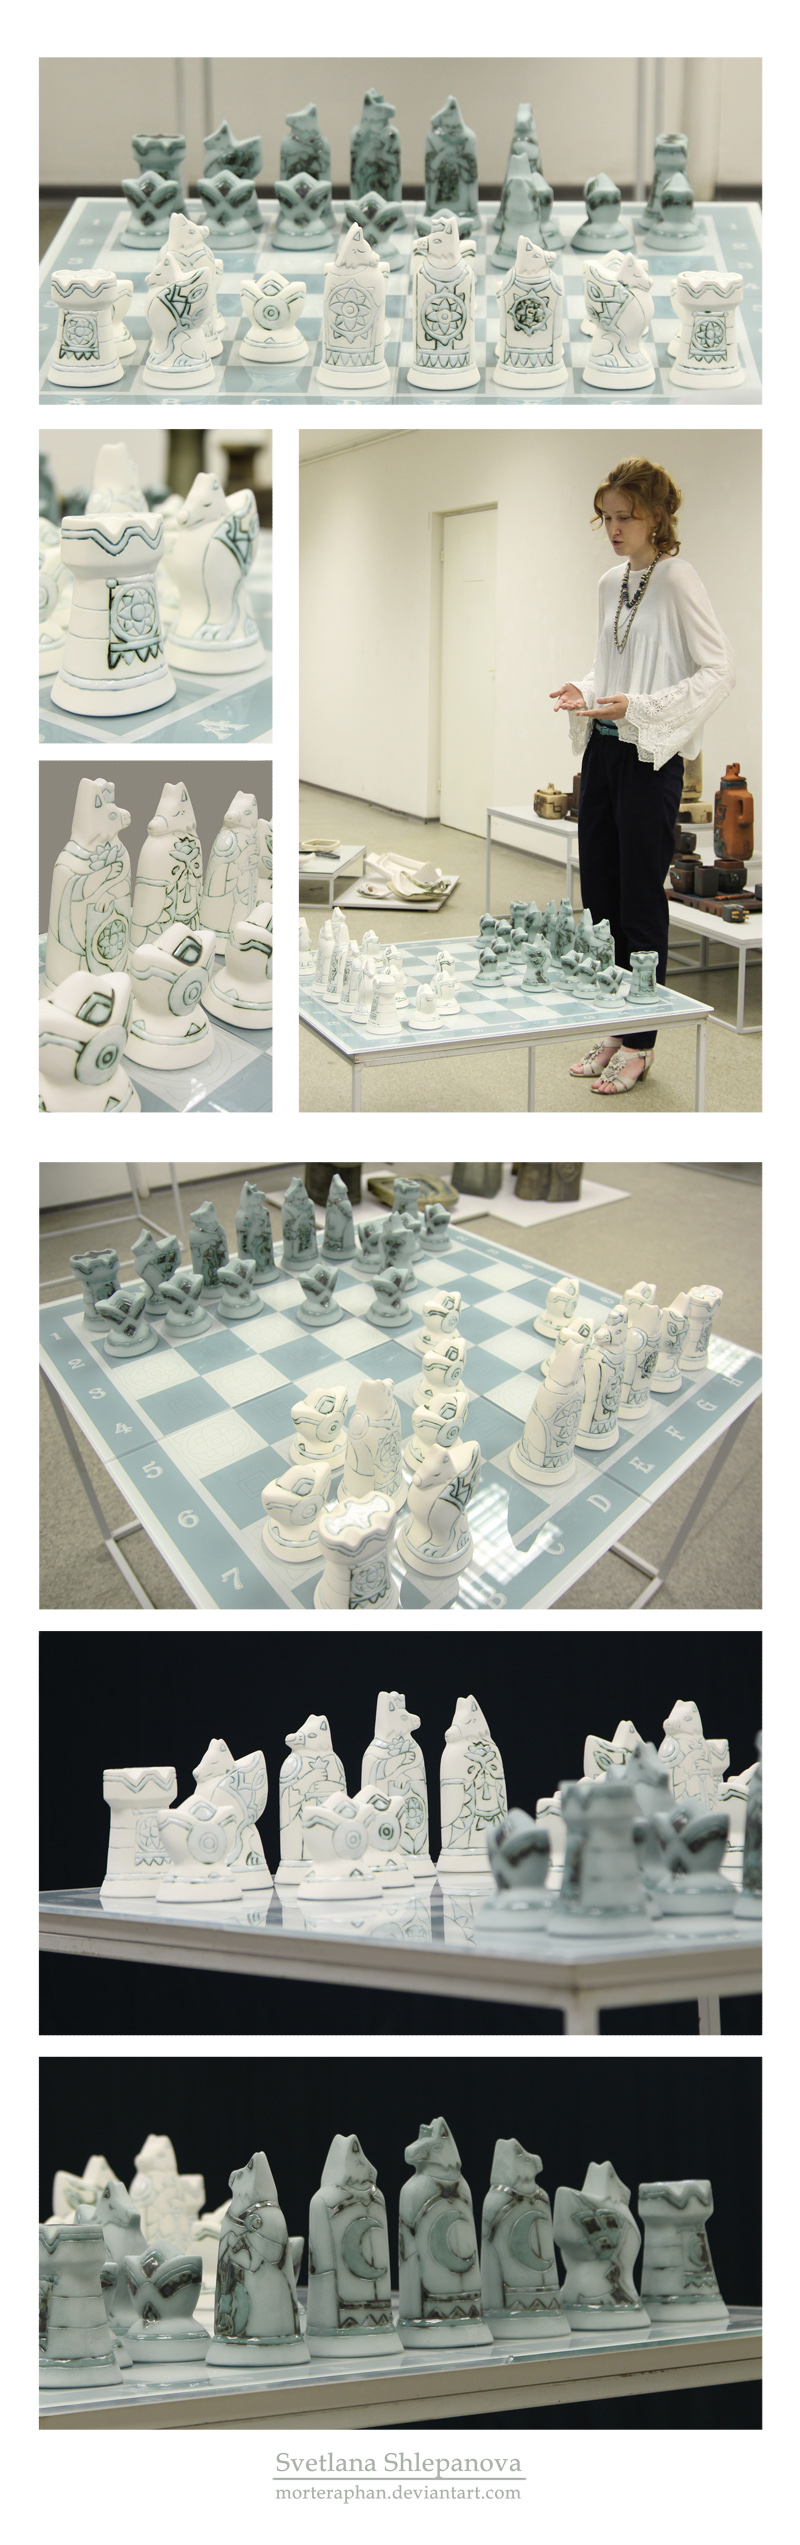 The Chess - Graduation project